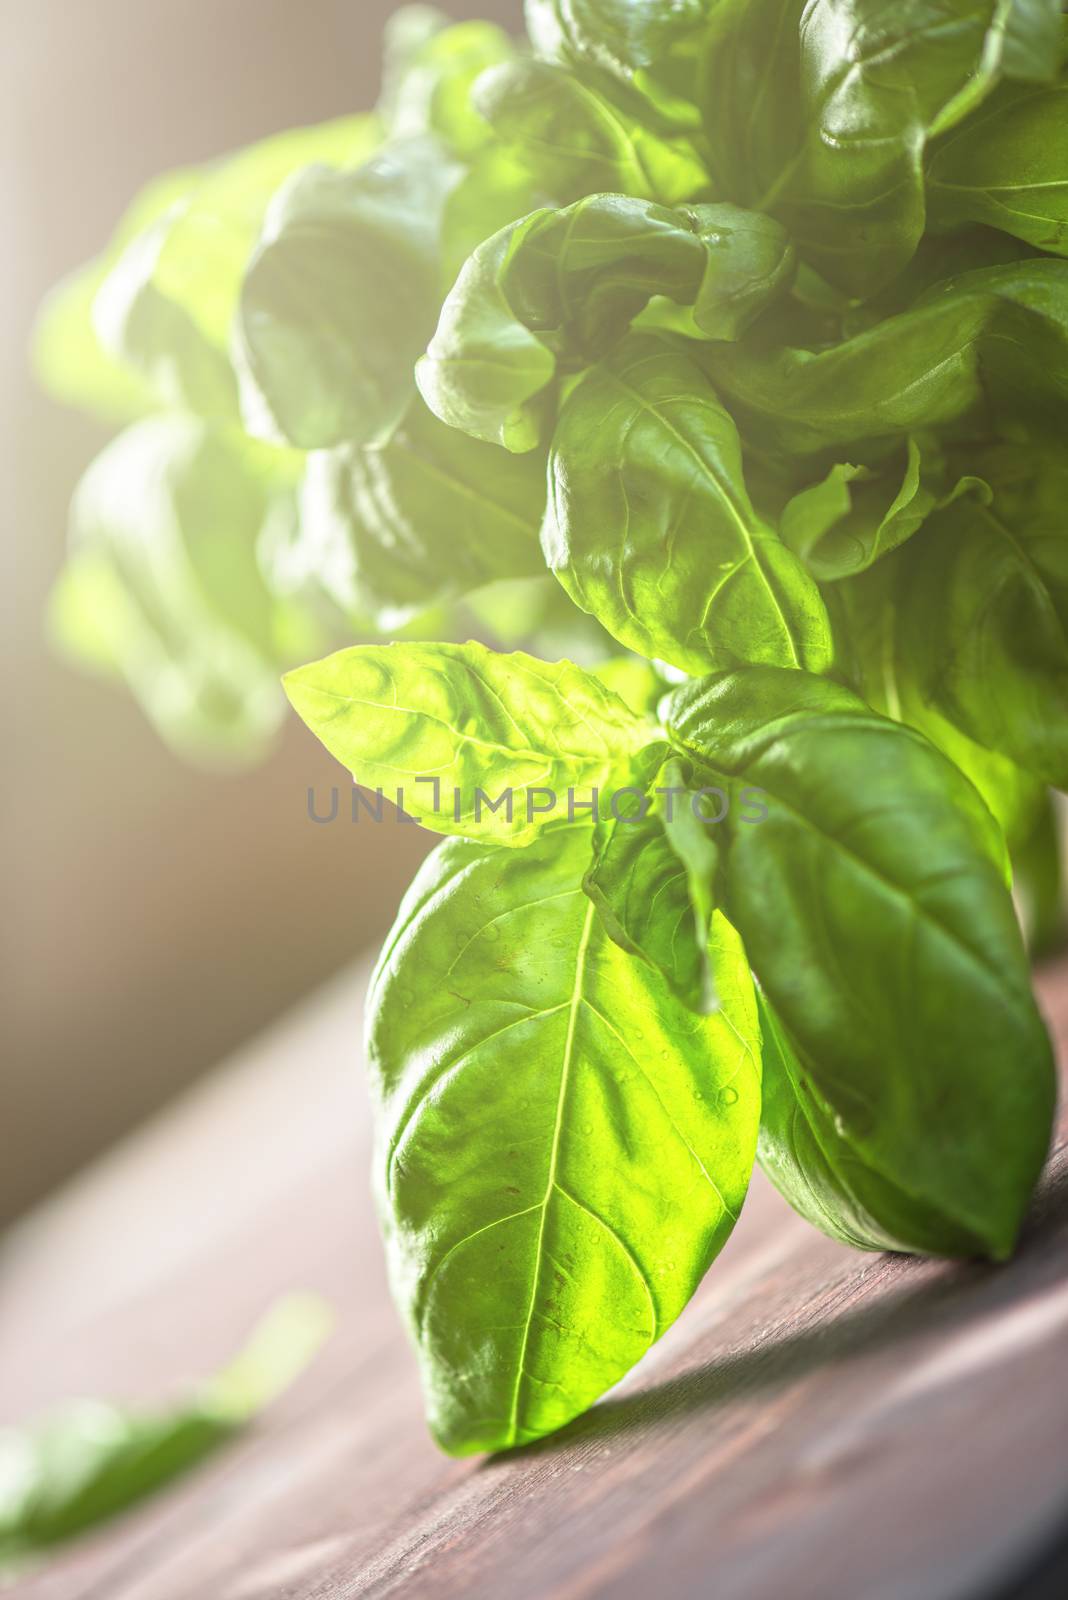 Fresh organic basil leaves on a wooden table